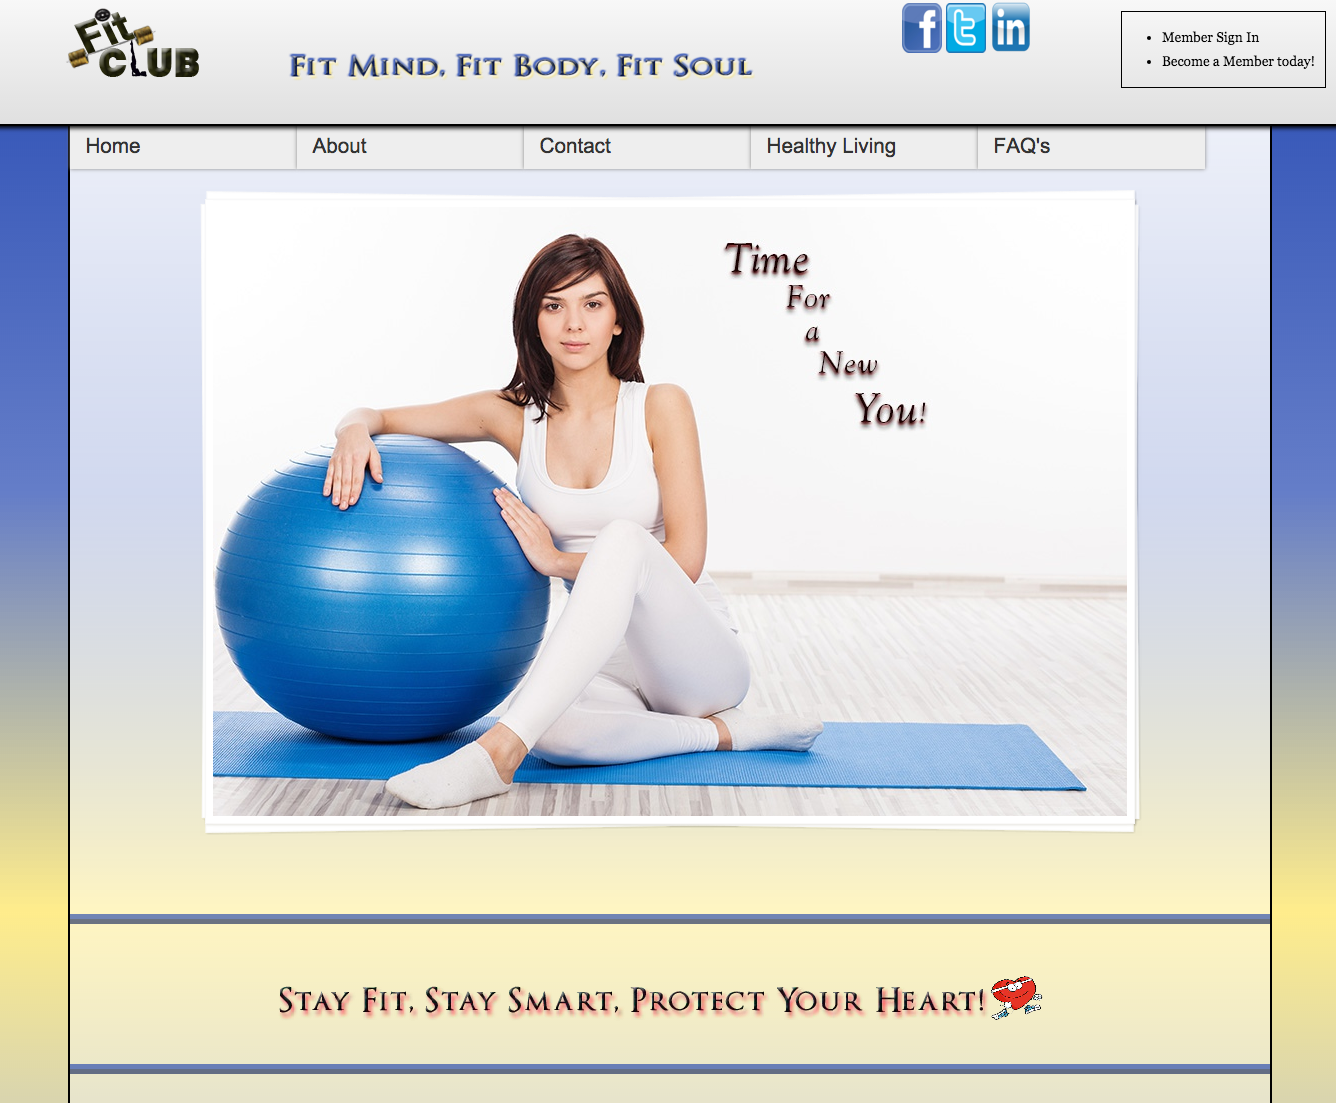 Image of lady and exercise ball